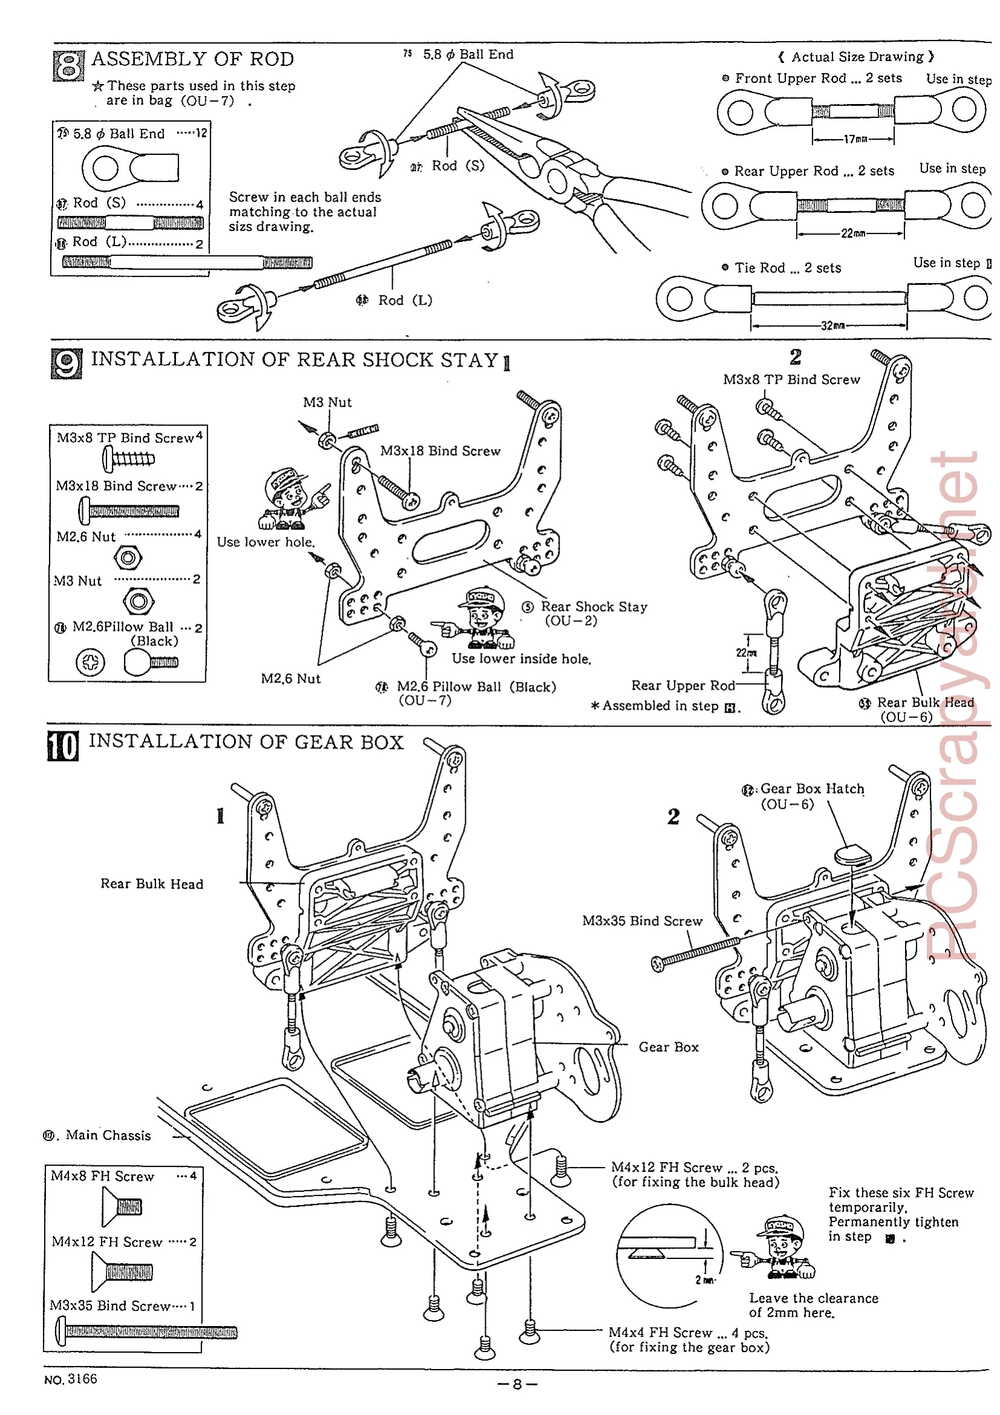 Kyosho - 3166 - Outlaw-Ultima Truck - Manual - Page 08